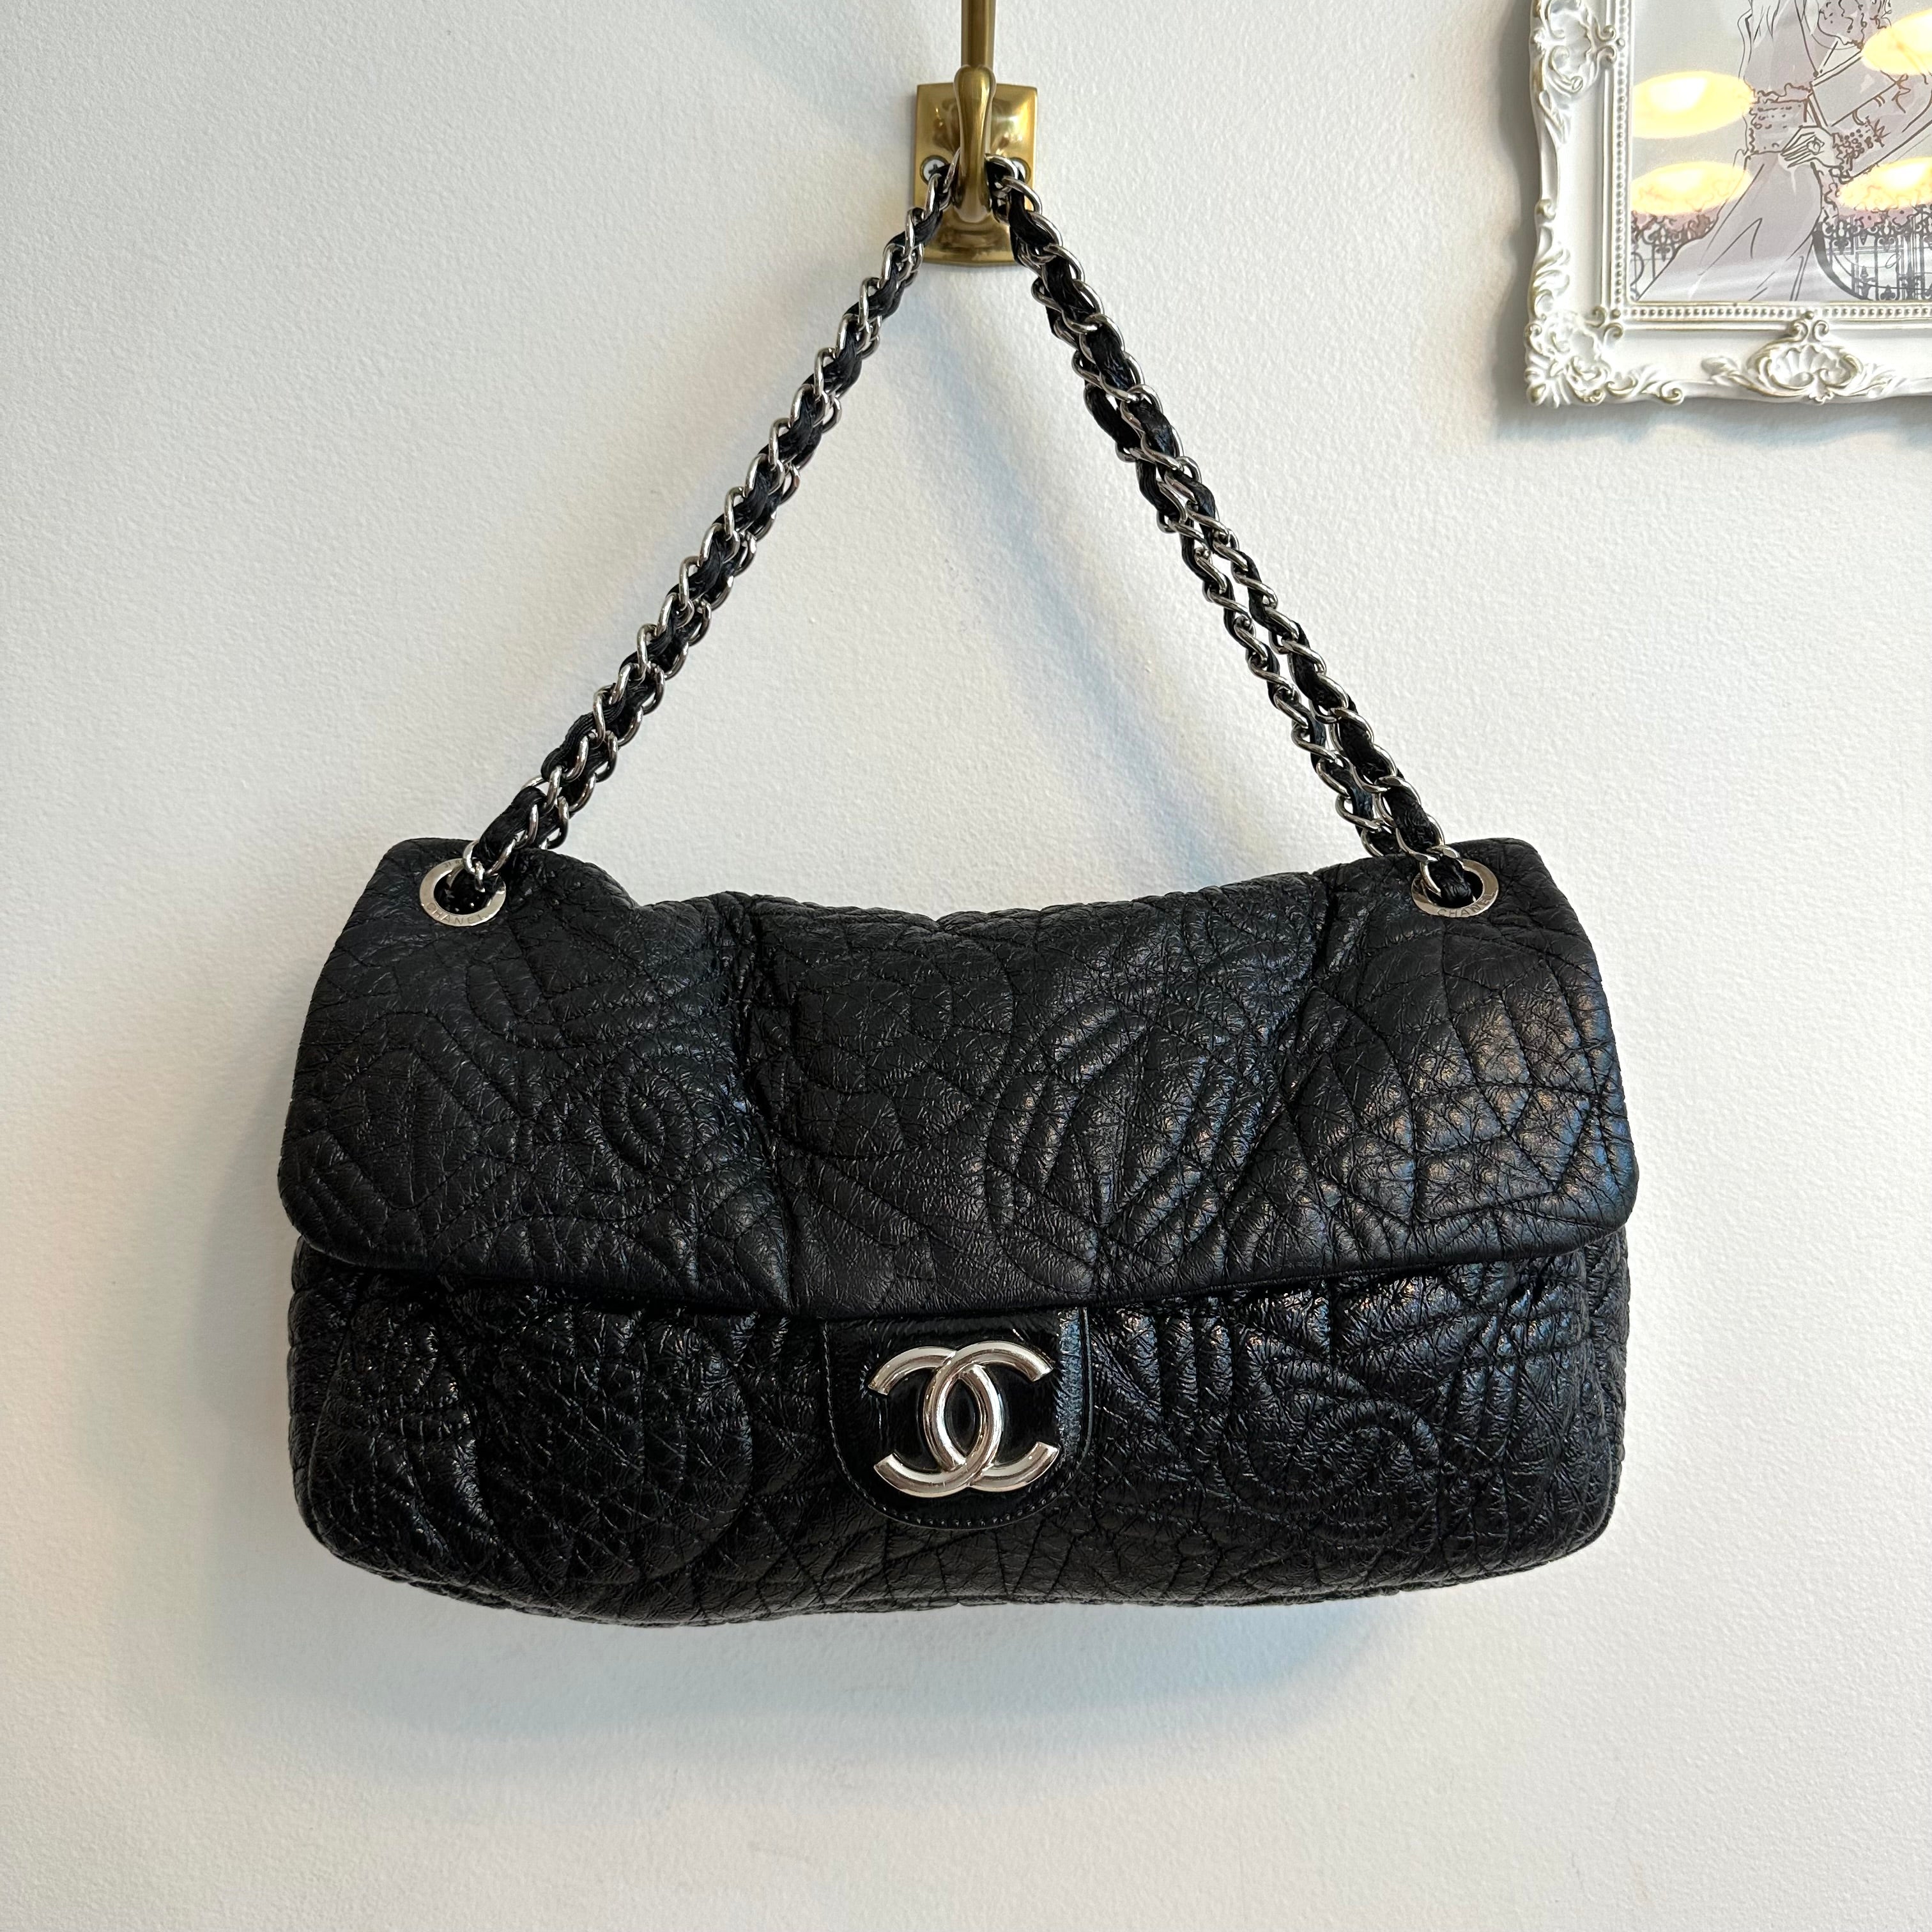 Pre-Owned CHANEL Graphic Edge Flap Shoulder Bag